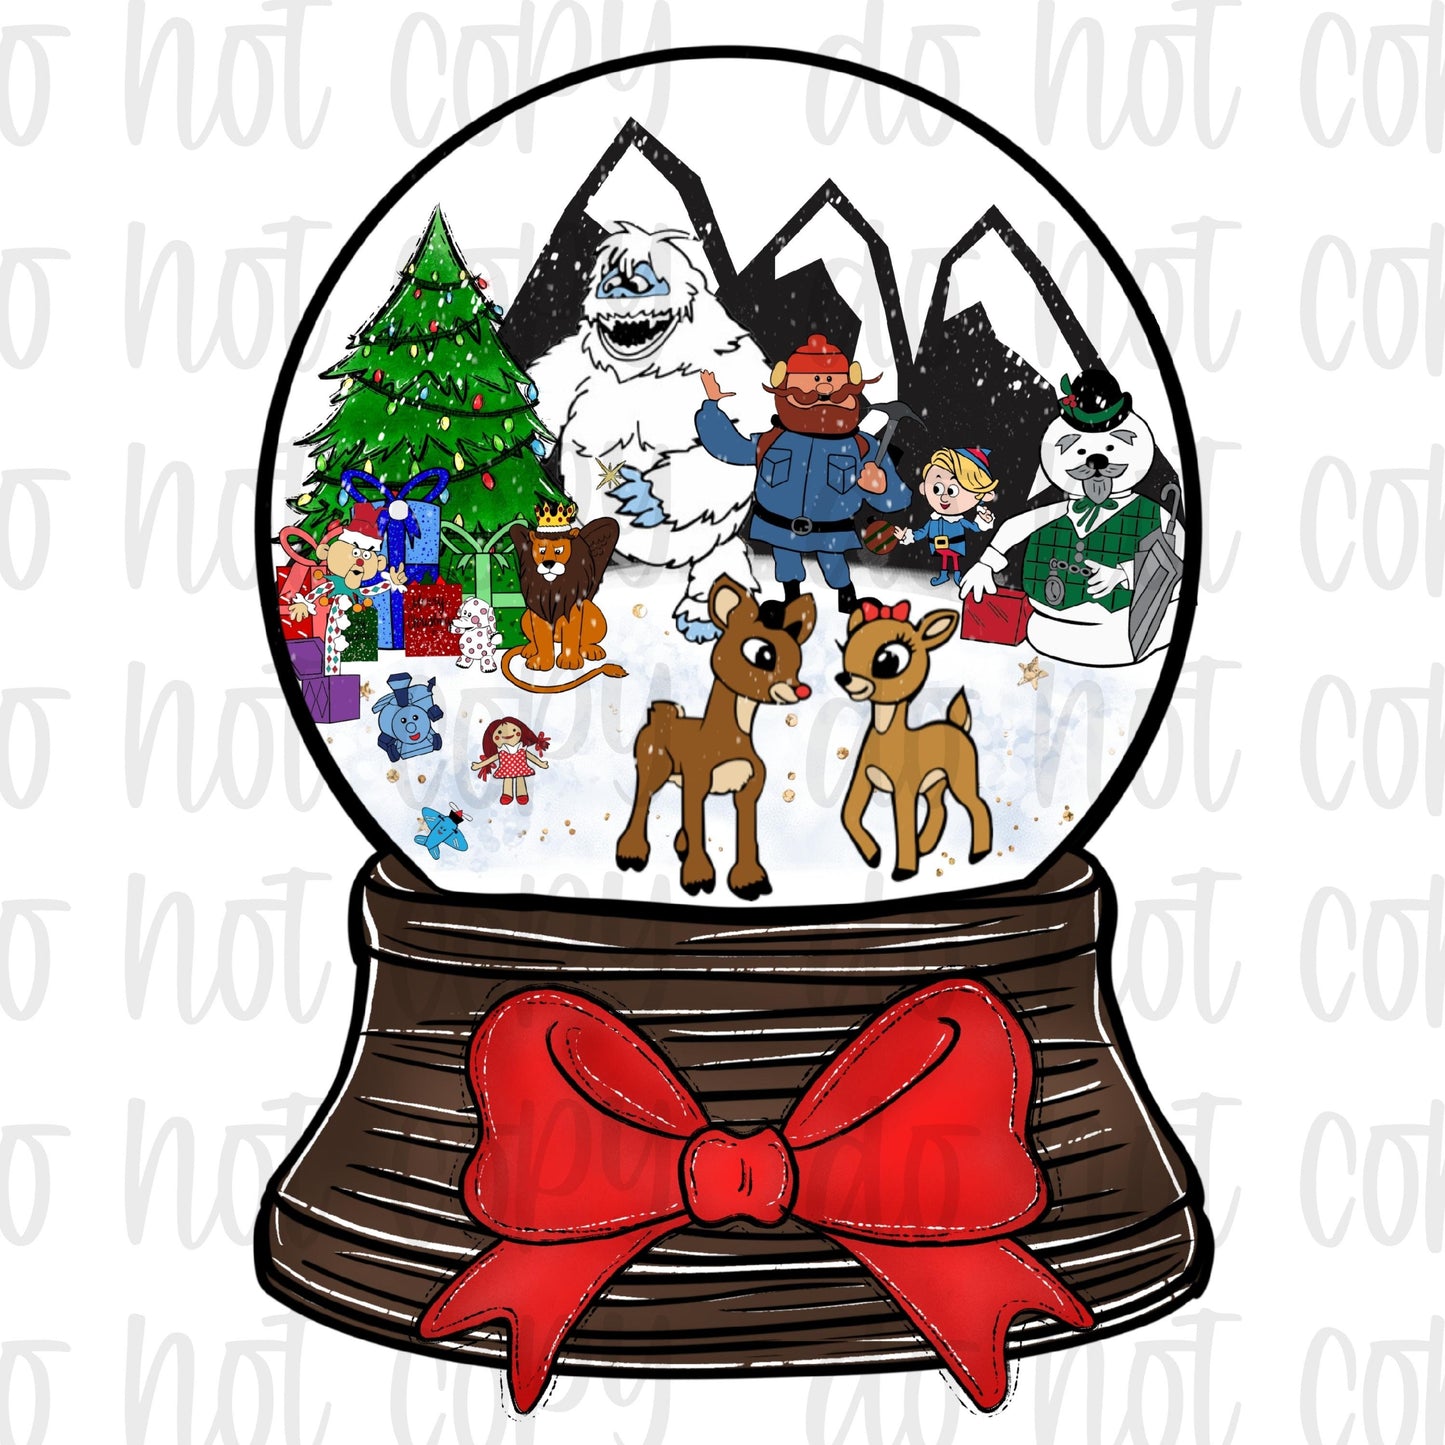 Famous reindeer inspired snow globe